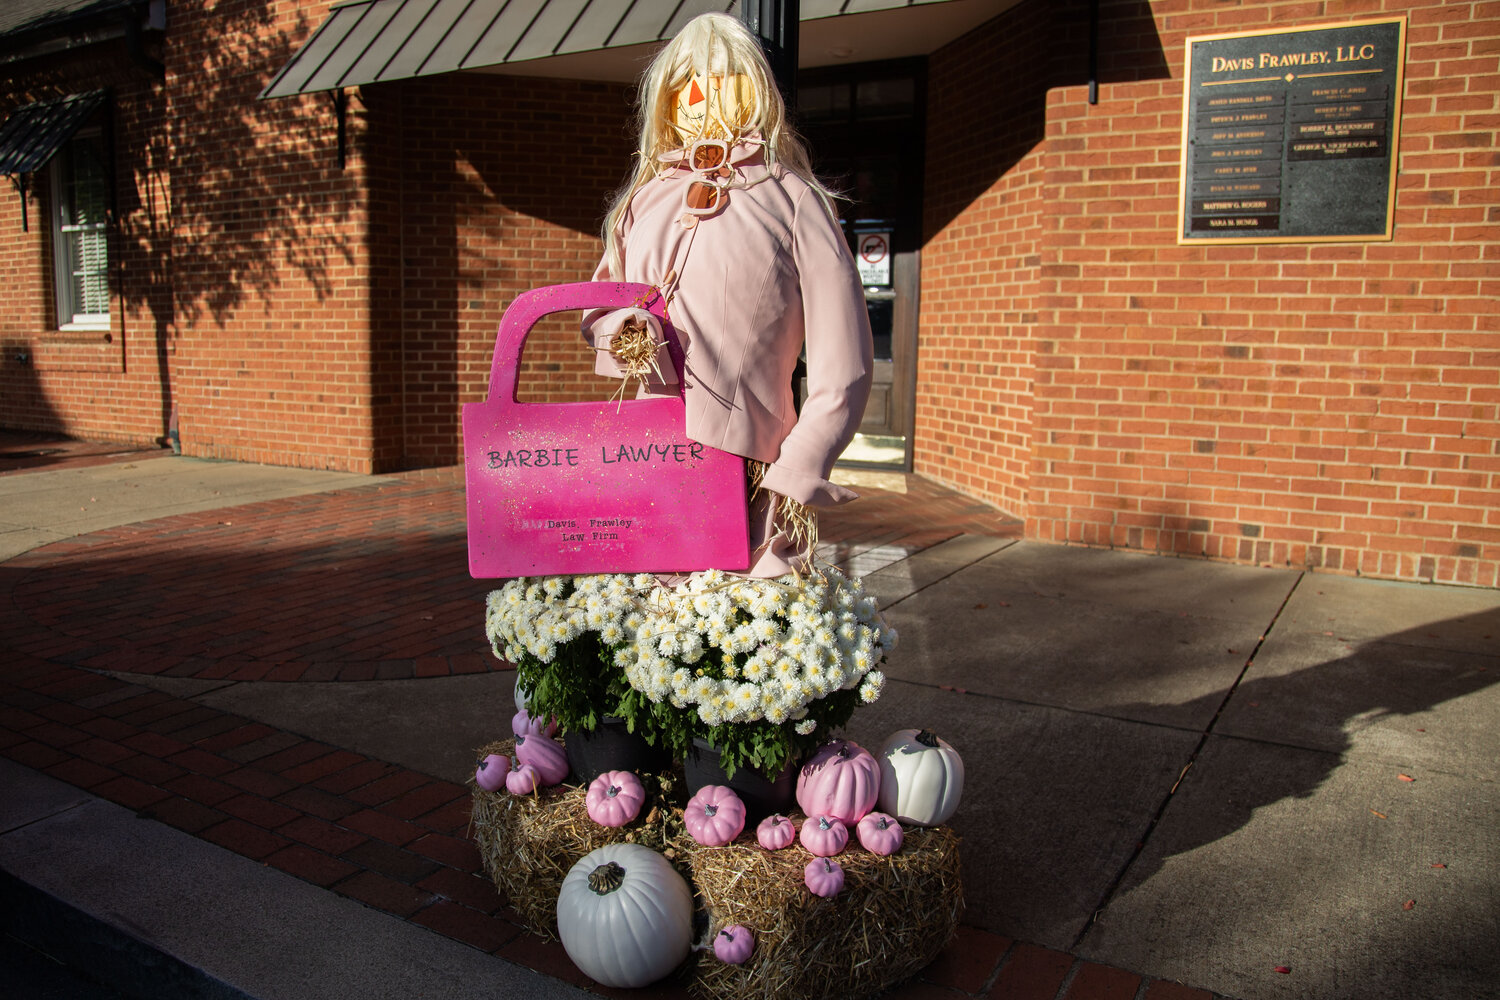 The Davis Frawley Law Firm entry into the Town of Lexington's downtown scarecrow contest